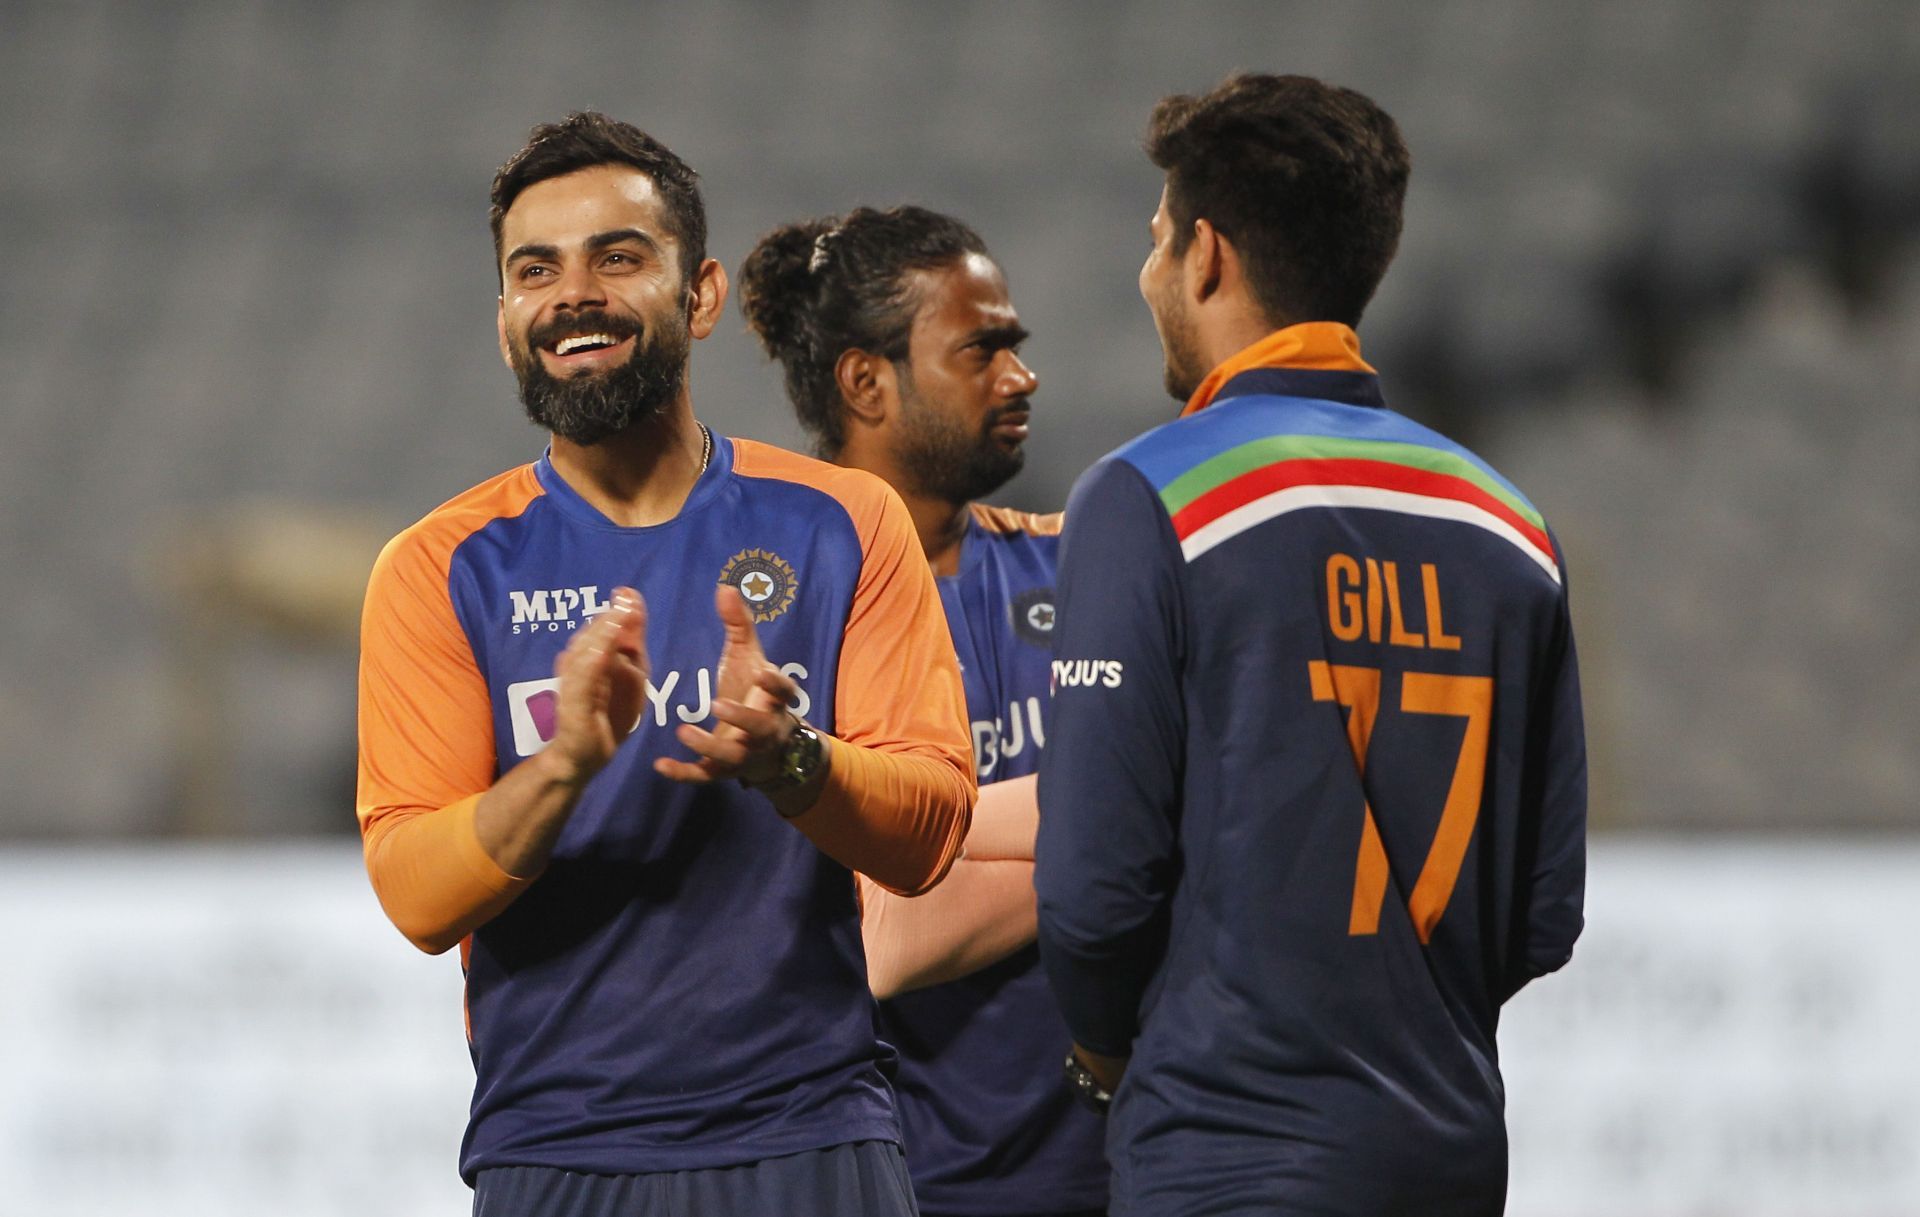 Virat Kohli and Shubman Gill are often referred to as &lsquo;king&rsquo; and &lsquo;prince&rsquo;. (Pic: Getty Images)